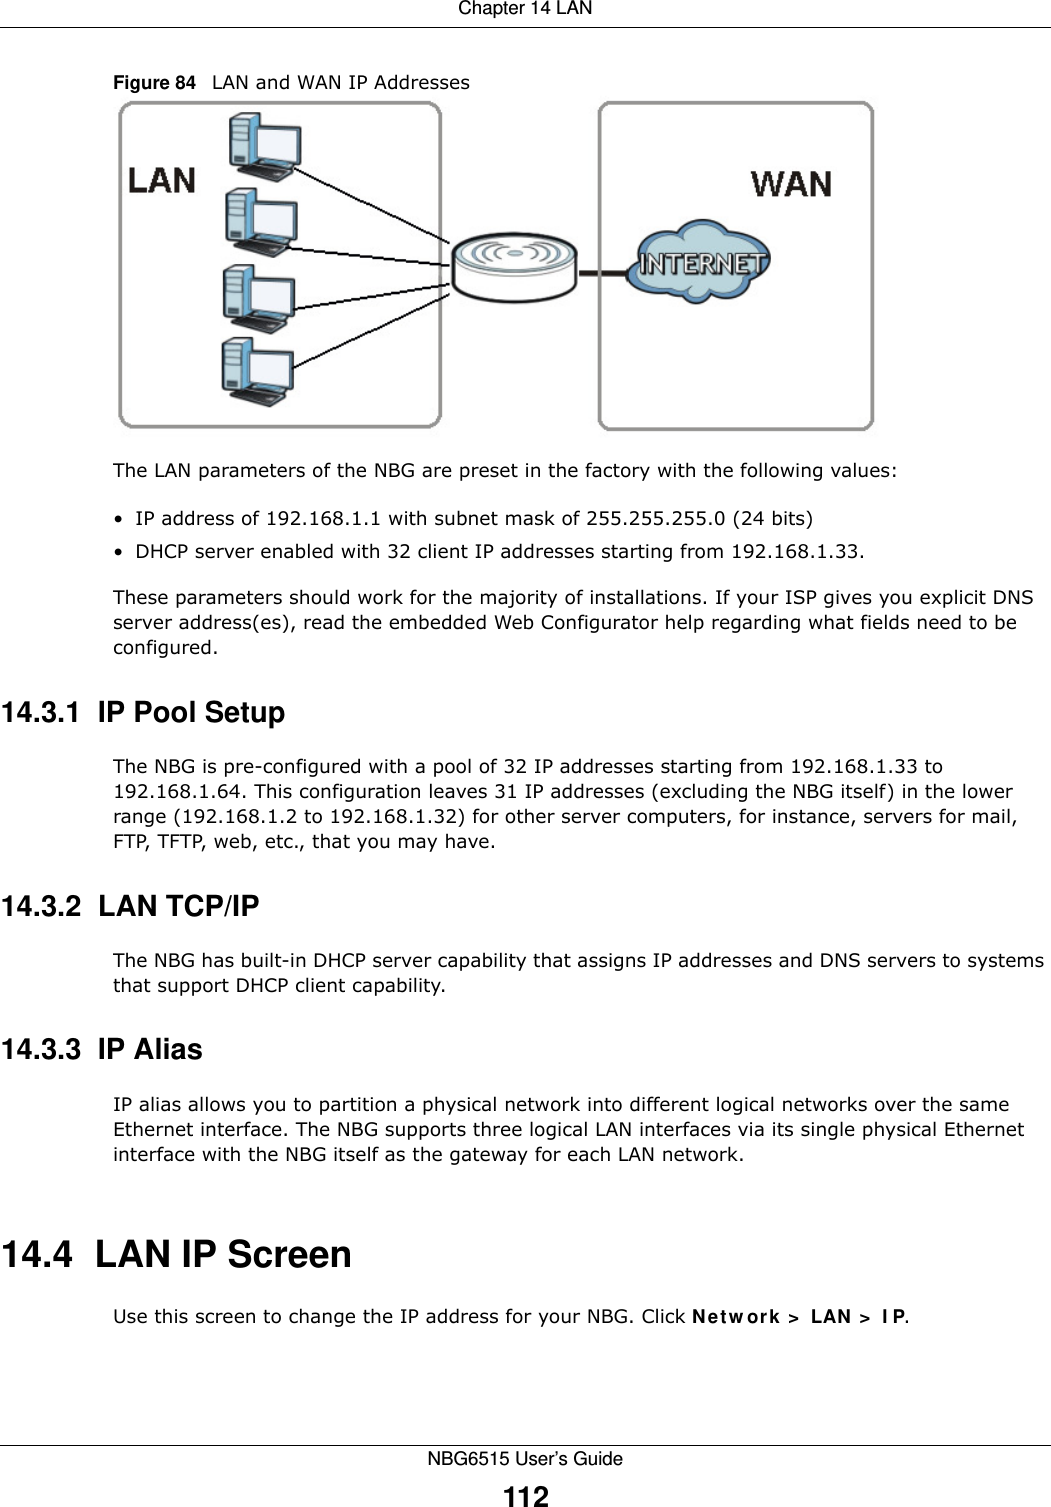 Chapter 14 LANNBG6515 User’s Guide112Figure 84   LAN and WAN IP AddressesThe LAN parameters of the NBG are preset in the factory with the following values:• IP address of 192.168.1.1 with subnet mask of 255.255.255.0 (24 bits)• DHCP server enabled with 32 client IP addresses starting from 192.168.1.33. These parameters should work for the majority of installations. If your ISP gives you explicit DNS server address(es), read the embedded Web Configurator help regarding what fields need to be configured.14.3.1  IP Pool SetupThe NBG is pre-configured with a pool of 32 IP addresses starting from 192.168.1.33 to 192.168.1.64. This configuration leaves 31 IP addresses (excluding the NBG itself) in the lower range (192.168.1.2 to 192.168.1.32) for other server computers, for instance, servers for mail, FTP, TFTP, web, etc., that you may have.14.3.2  LAN TCP/IP The NBG has built-in DHCP server capability that assigns IP addresses and DNS servers to systems that support DHCP client capability.14.3.3  IP AliasIP alias allows you to partition a physical network into different logical networks over the same Ethernet interface. The NBG supports three logical LAN interfaces via its single physical Ethernet interface with the NBG itself as the gateway for each LAN network.14.4  LAN IP ScreenUse this screen to change the IP address for your NBG. Click Network &gt; LAN &gt; IP.